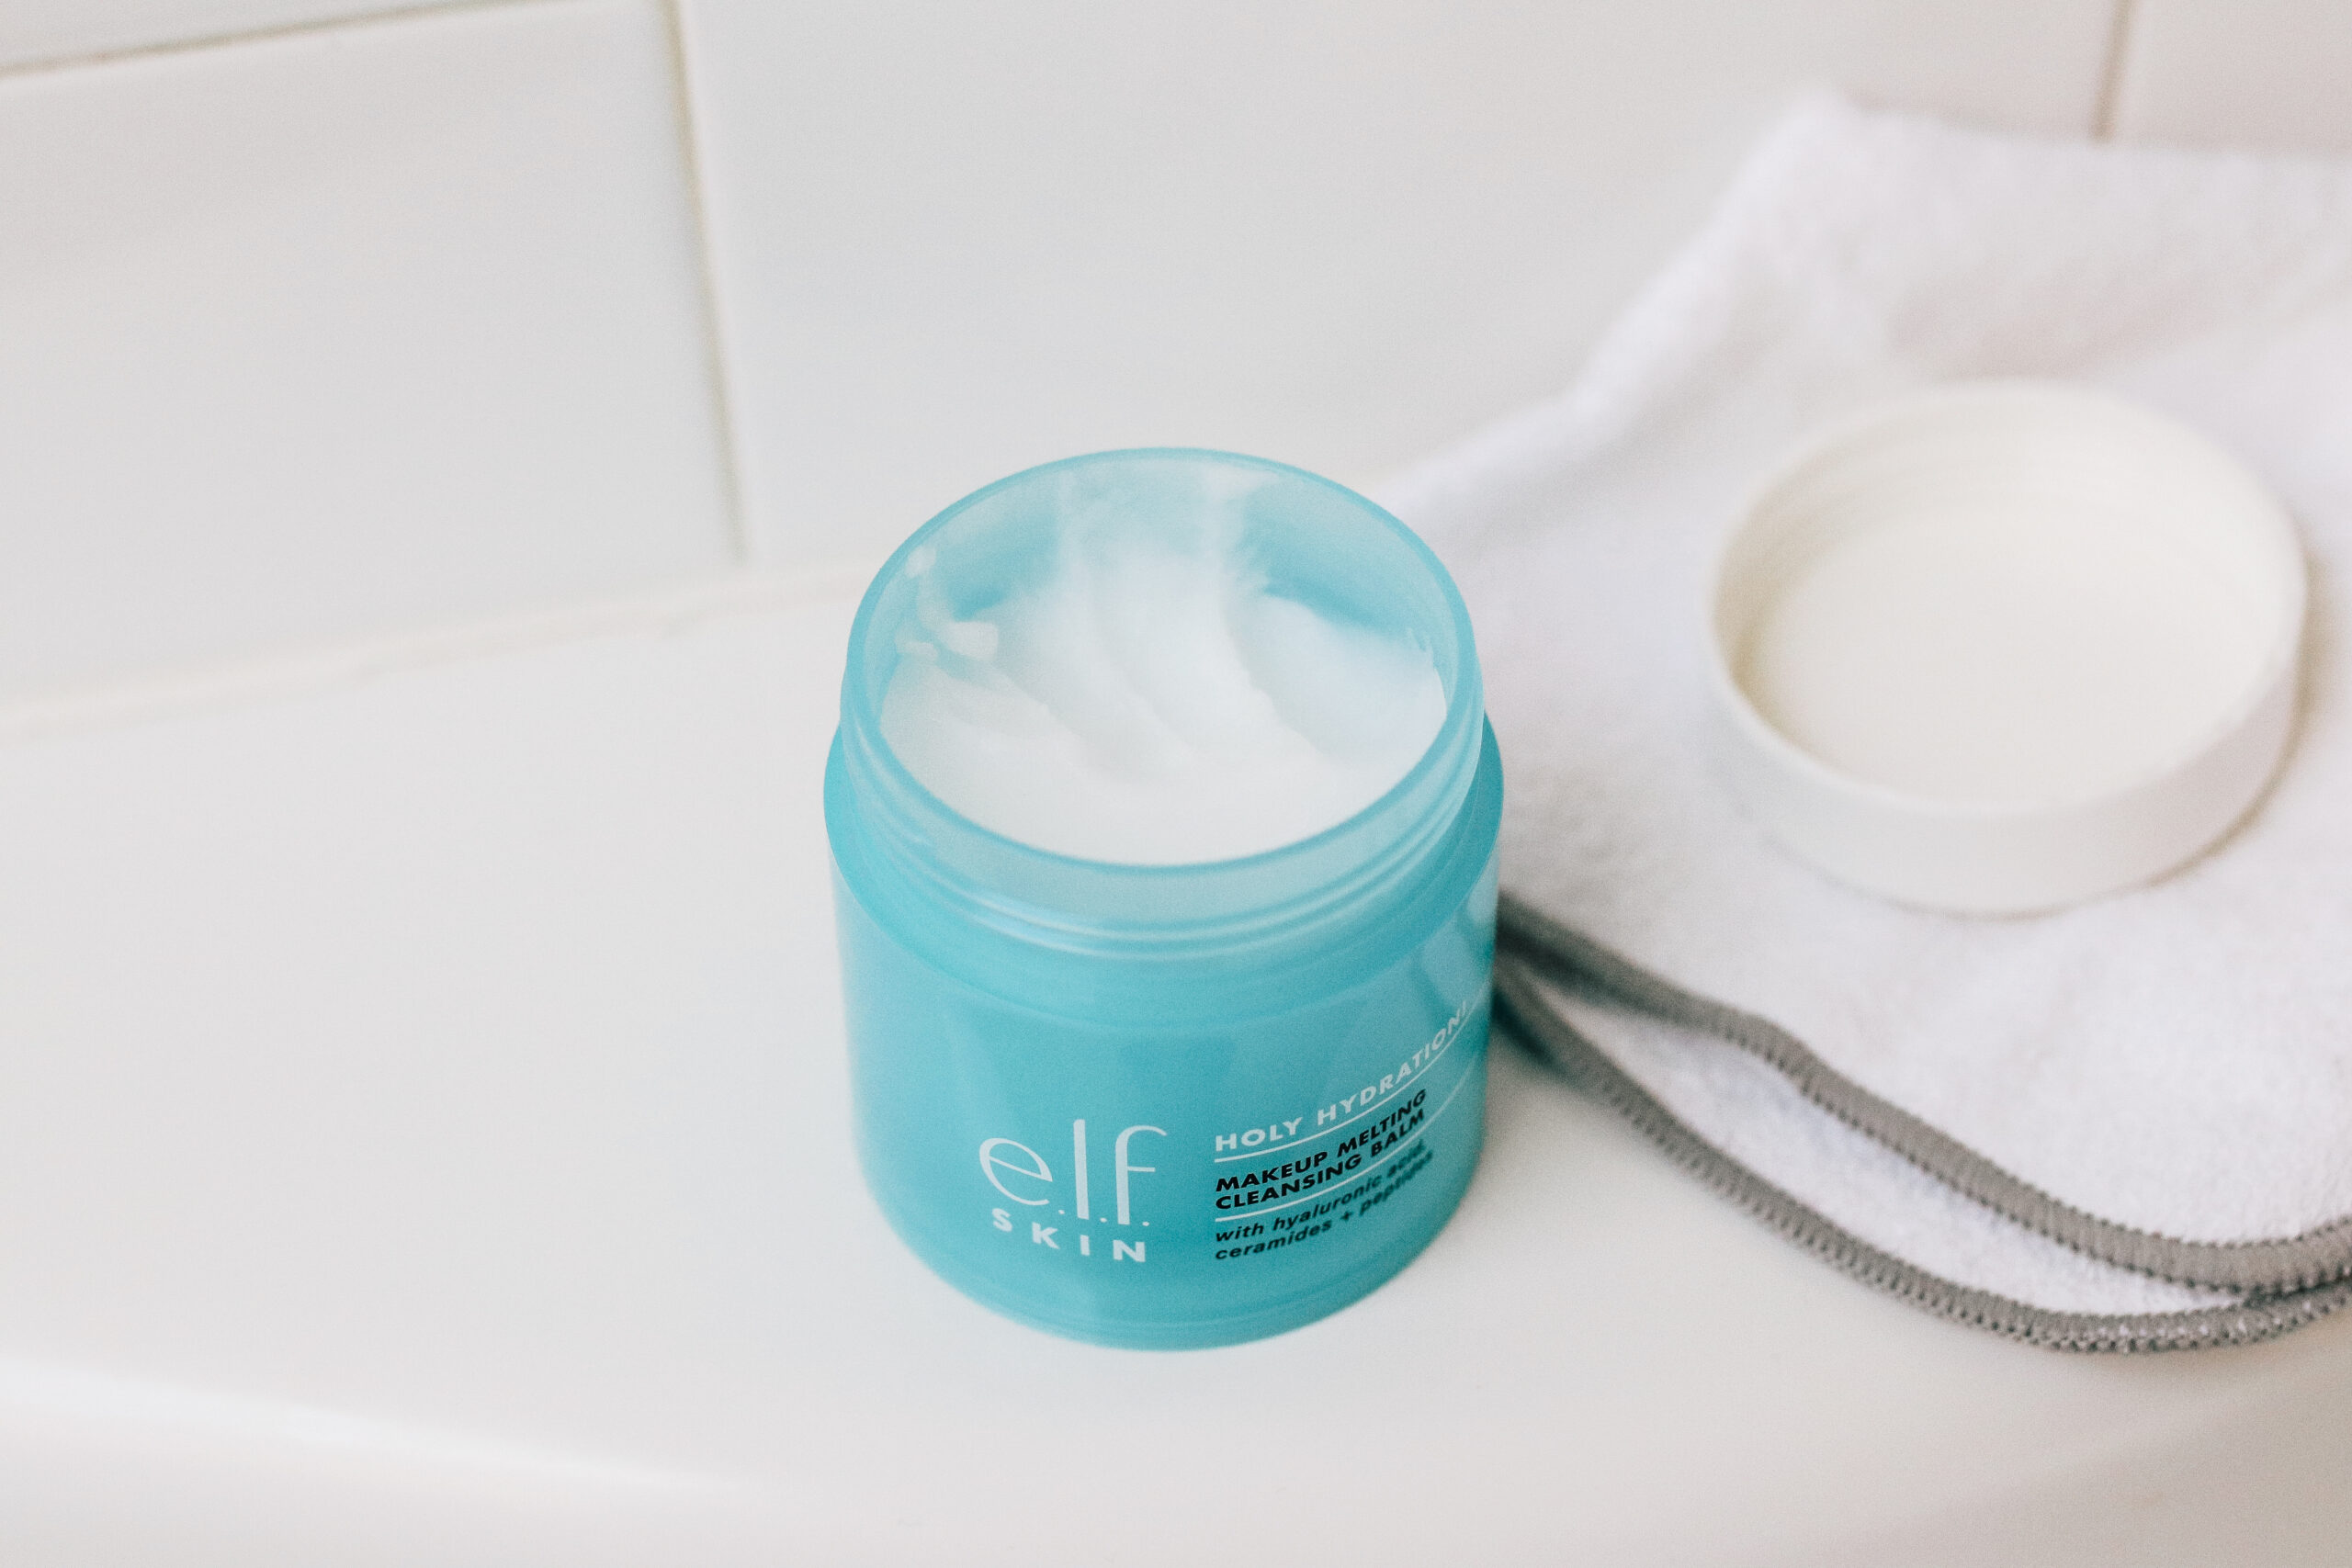 How to Use the e.l.f. Cleansing Balm